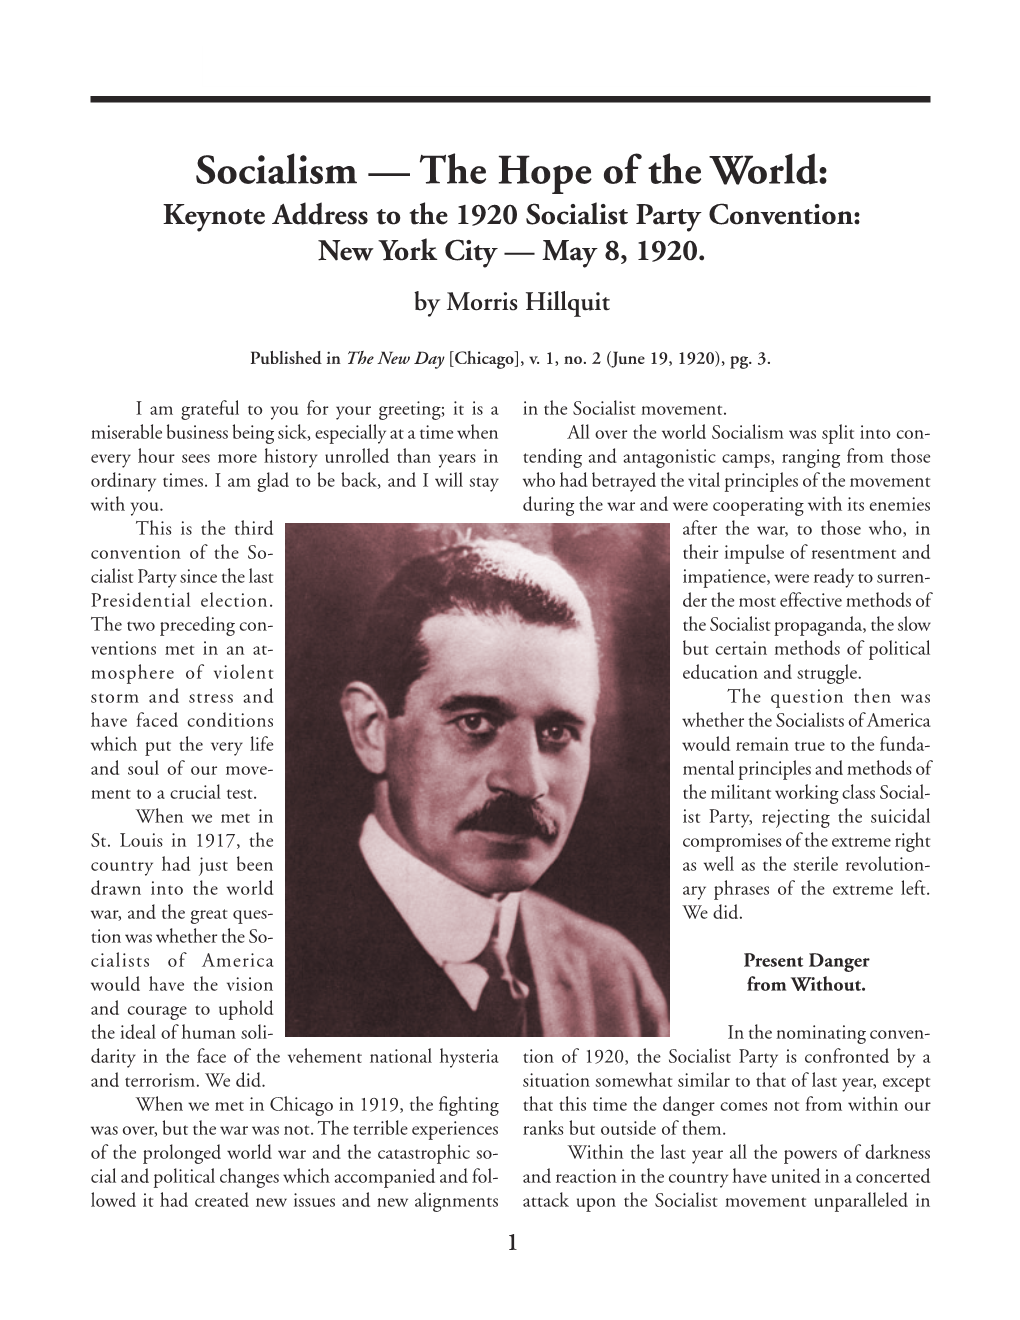 Socialism—The Hope of the World: Keynote Address to the 1920